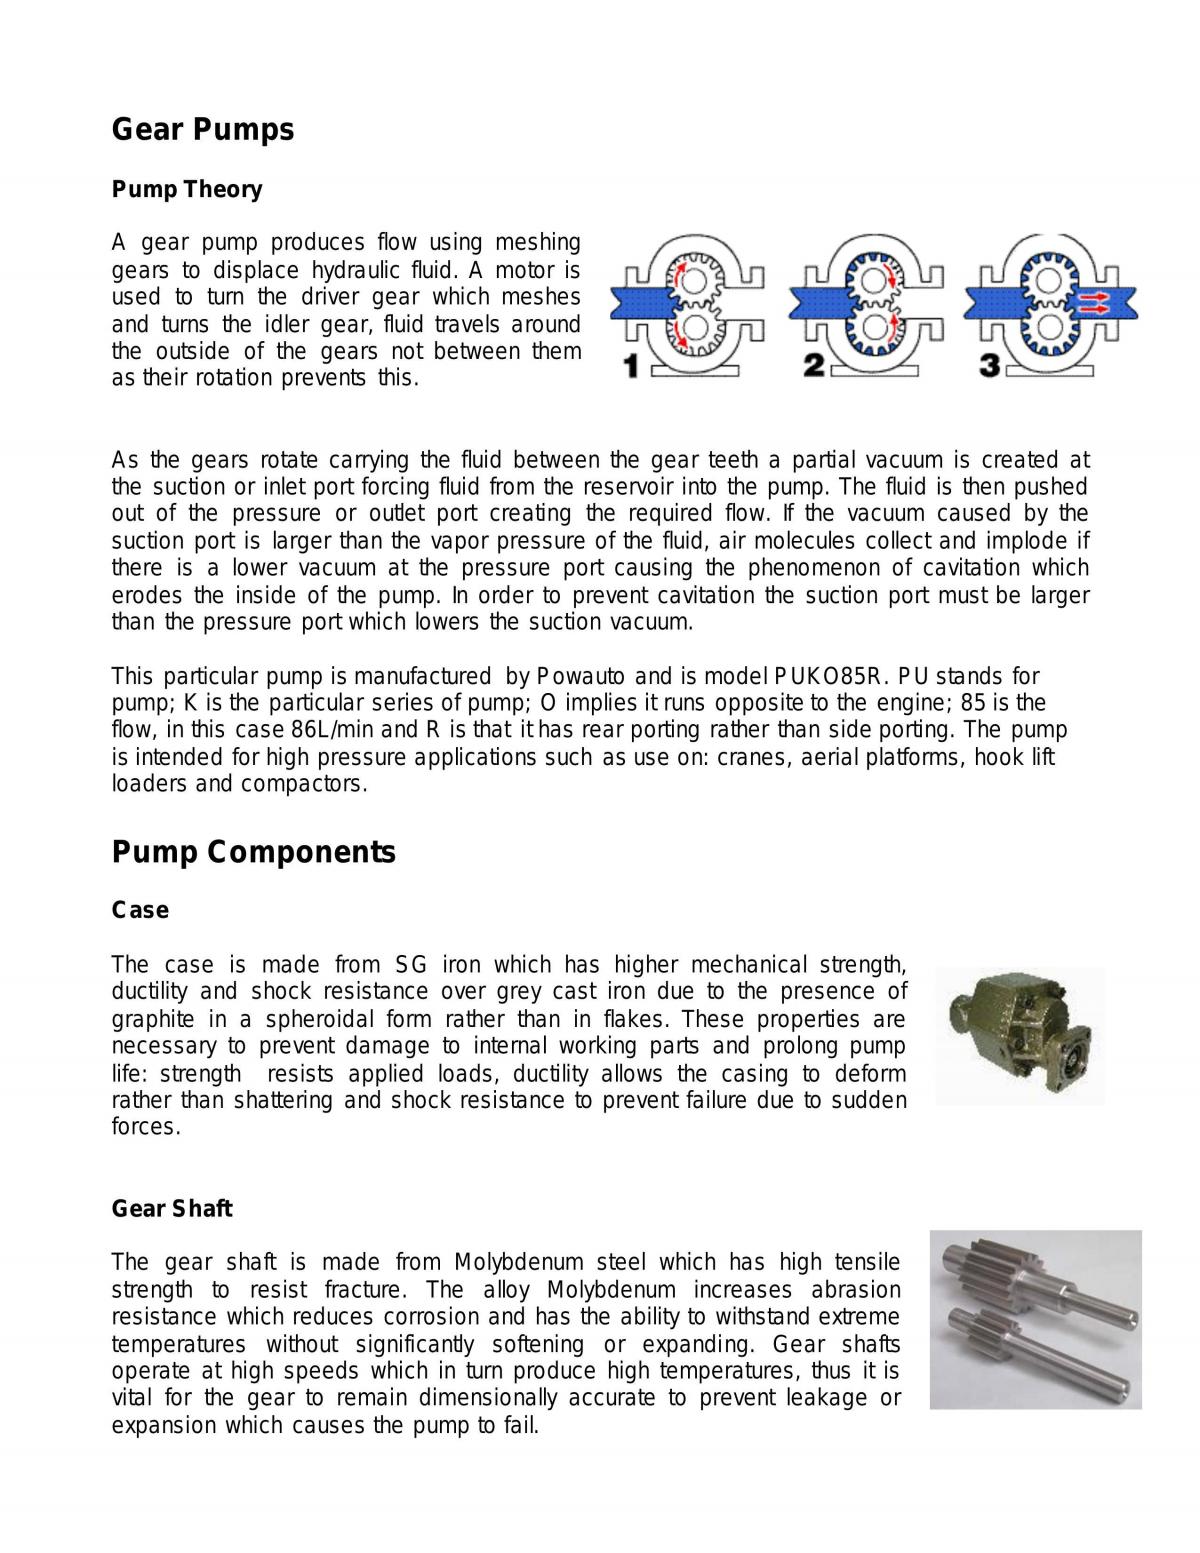 research paper on gear pump